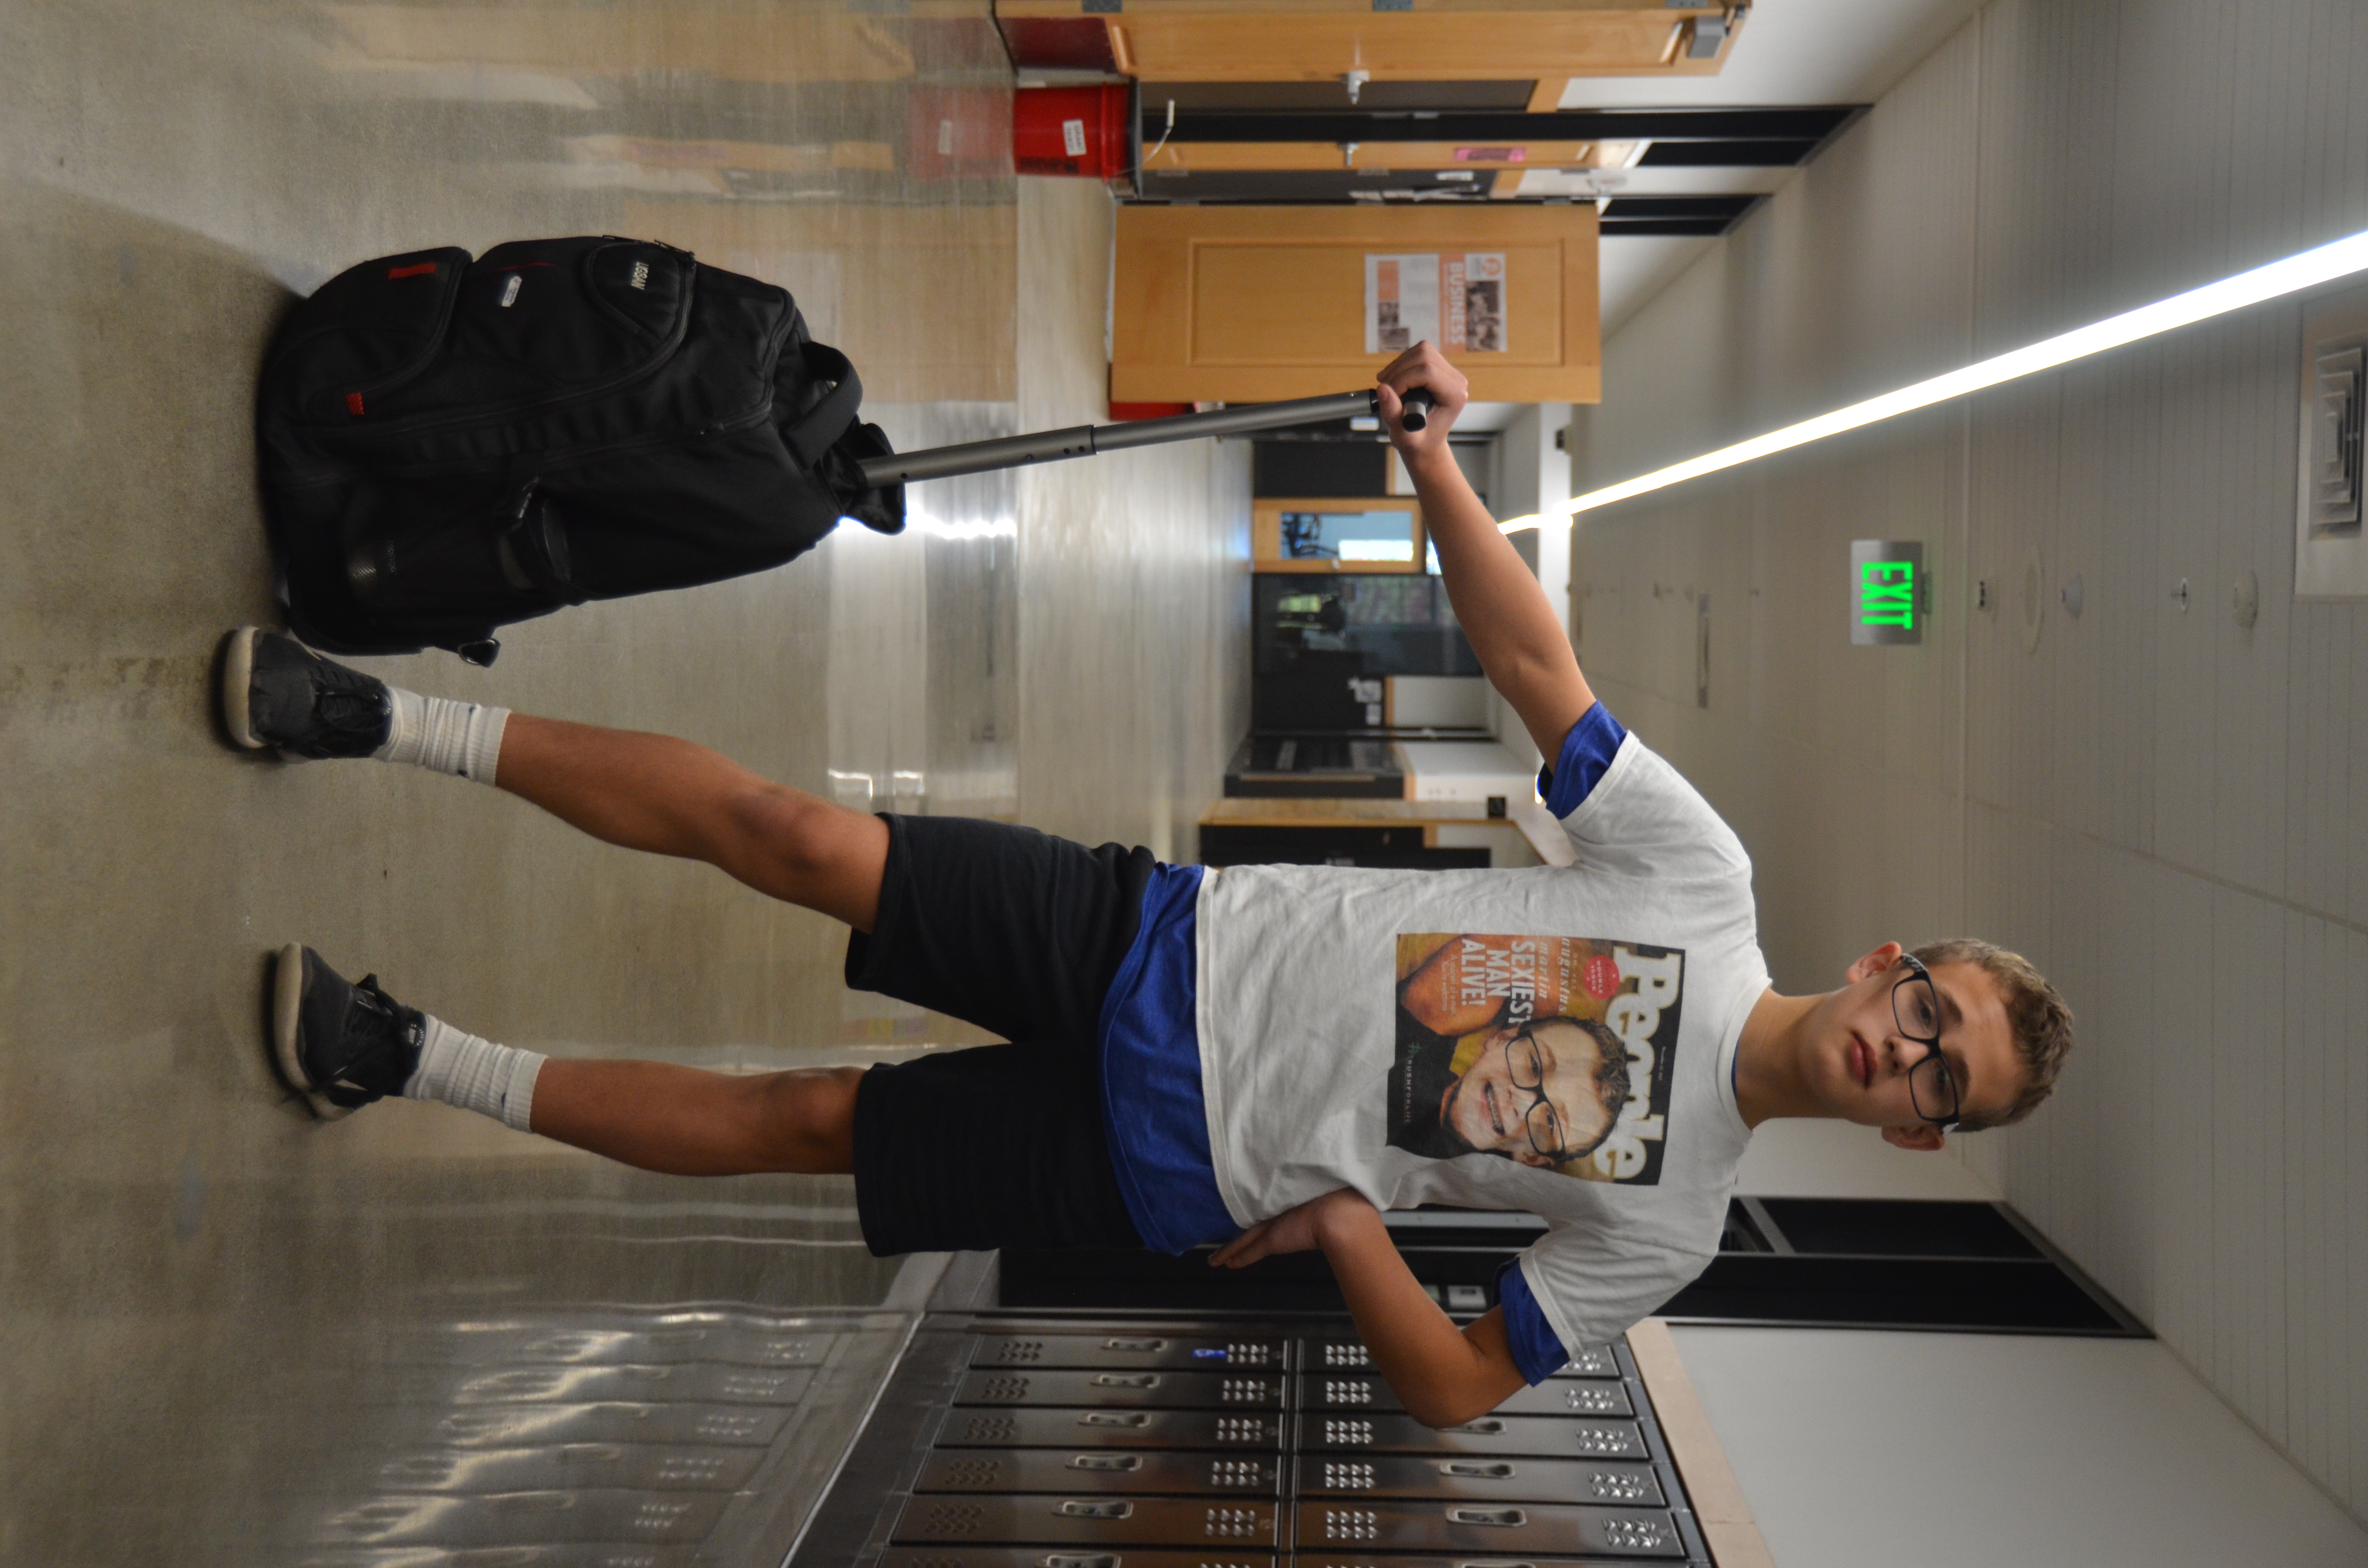 A boy with glasses and short blond hair stands in a school hallway with his rolling backpack